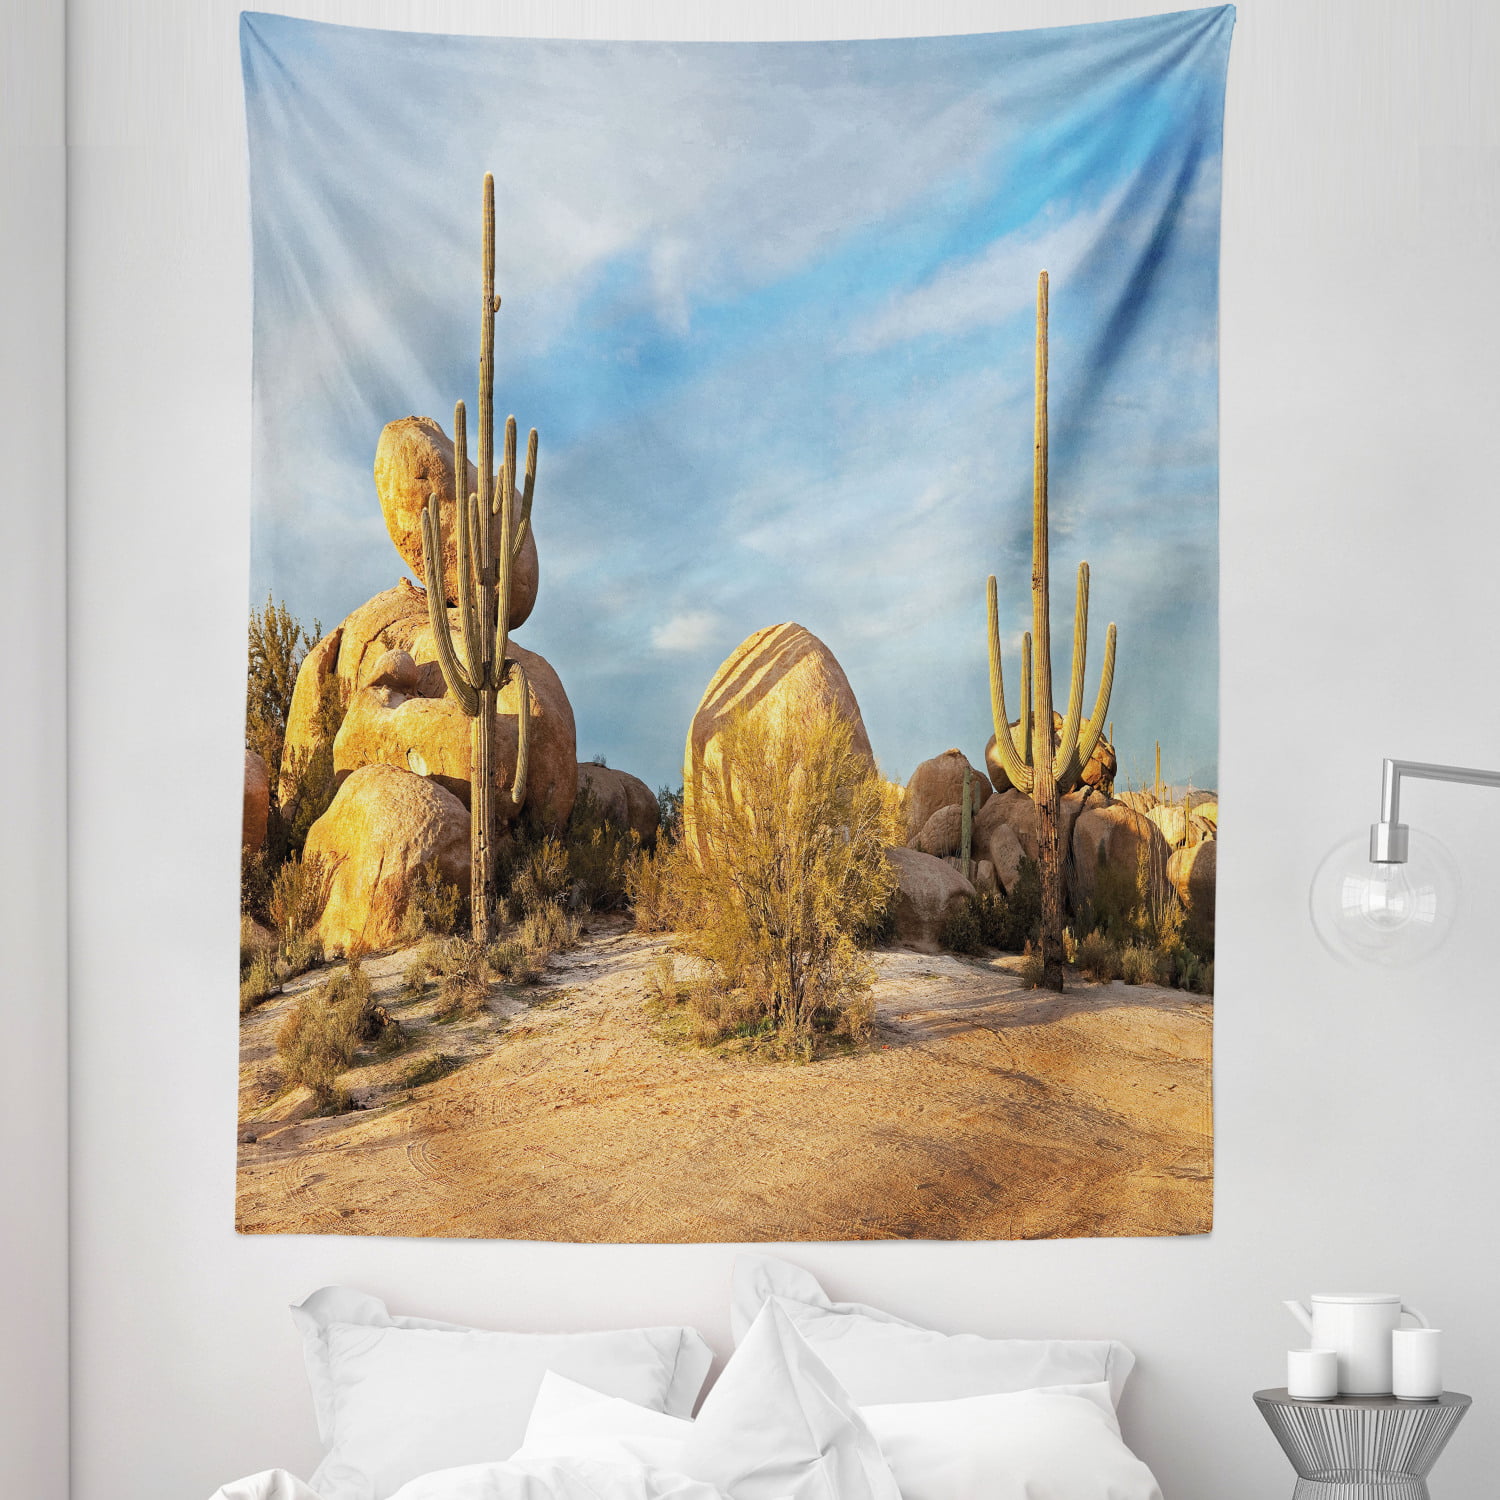 Saguaro cactus and Milky Way Tapestry Wall Hanging for Living Room Bedroom Decor 